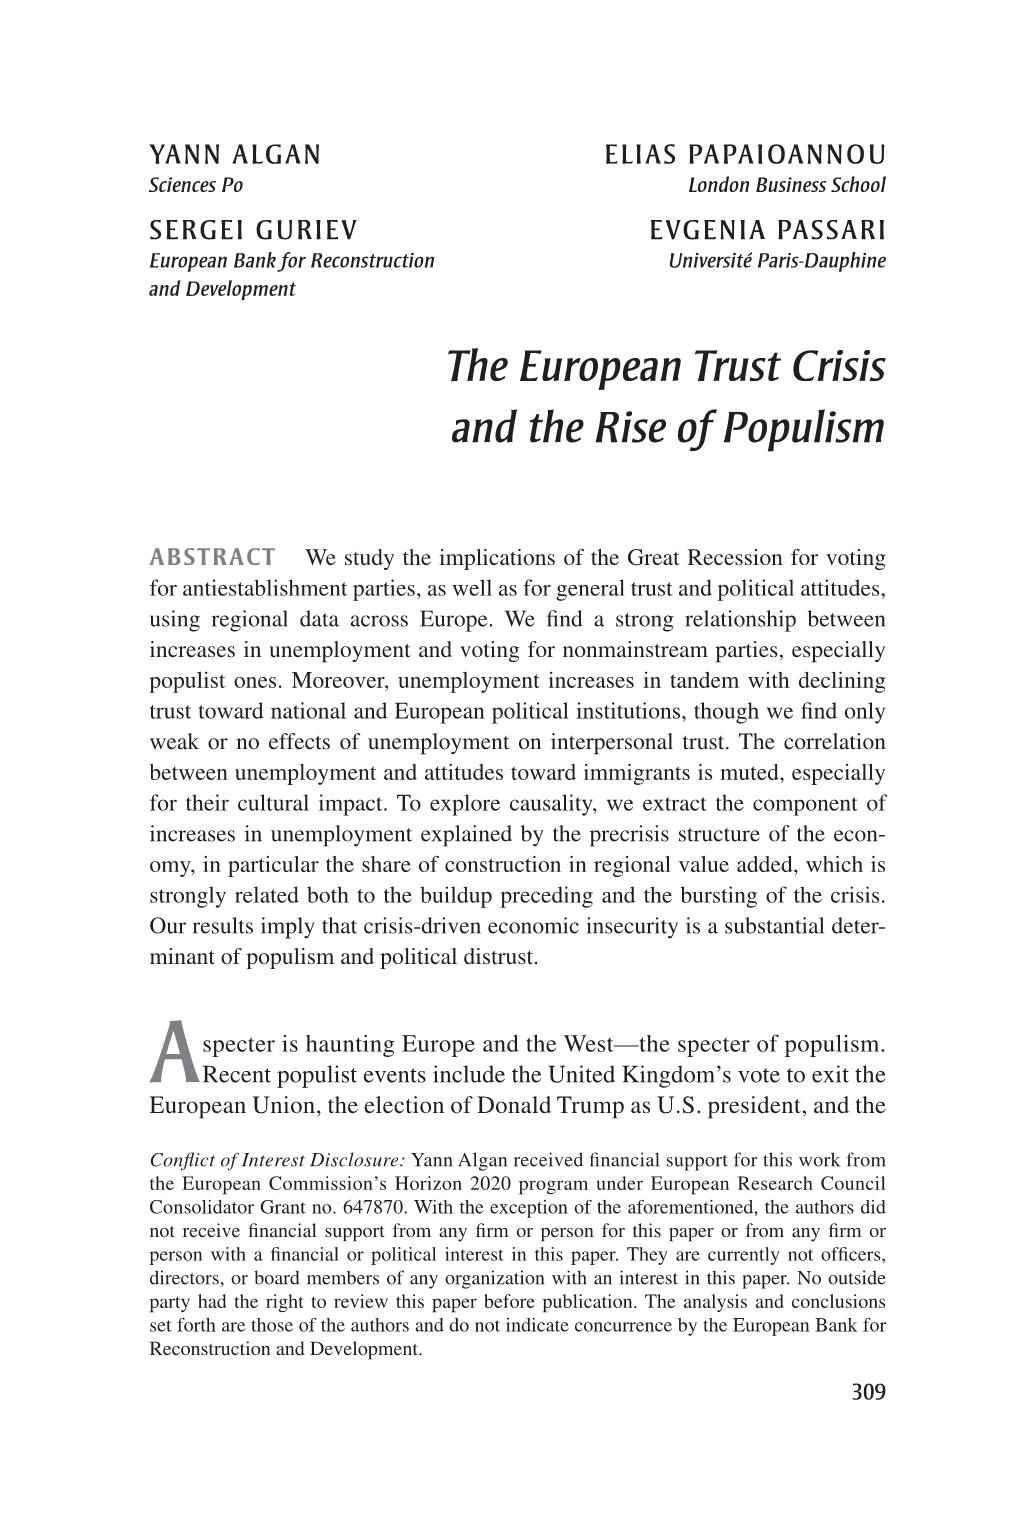 The European Trust Crisis and the Rise of Populism